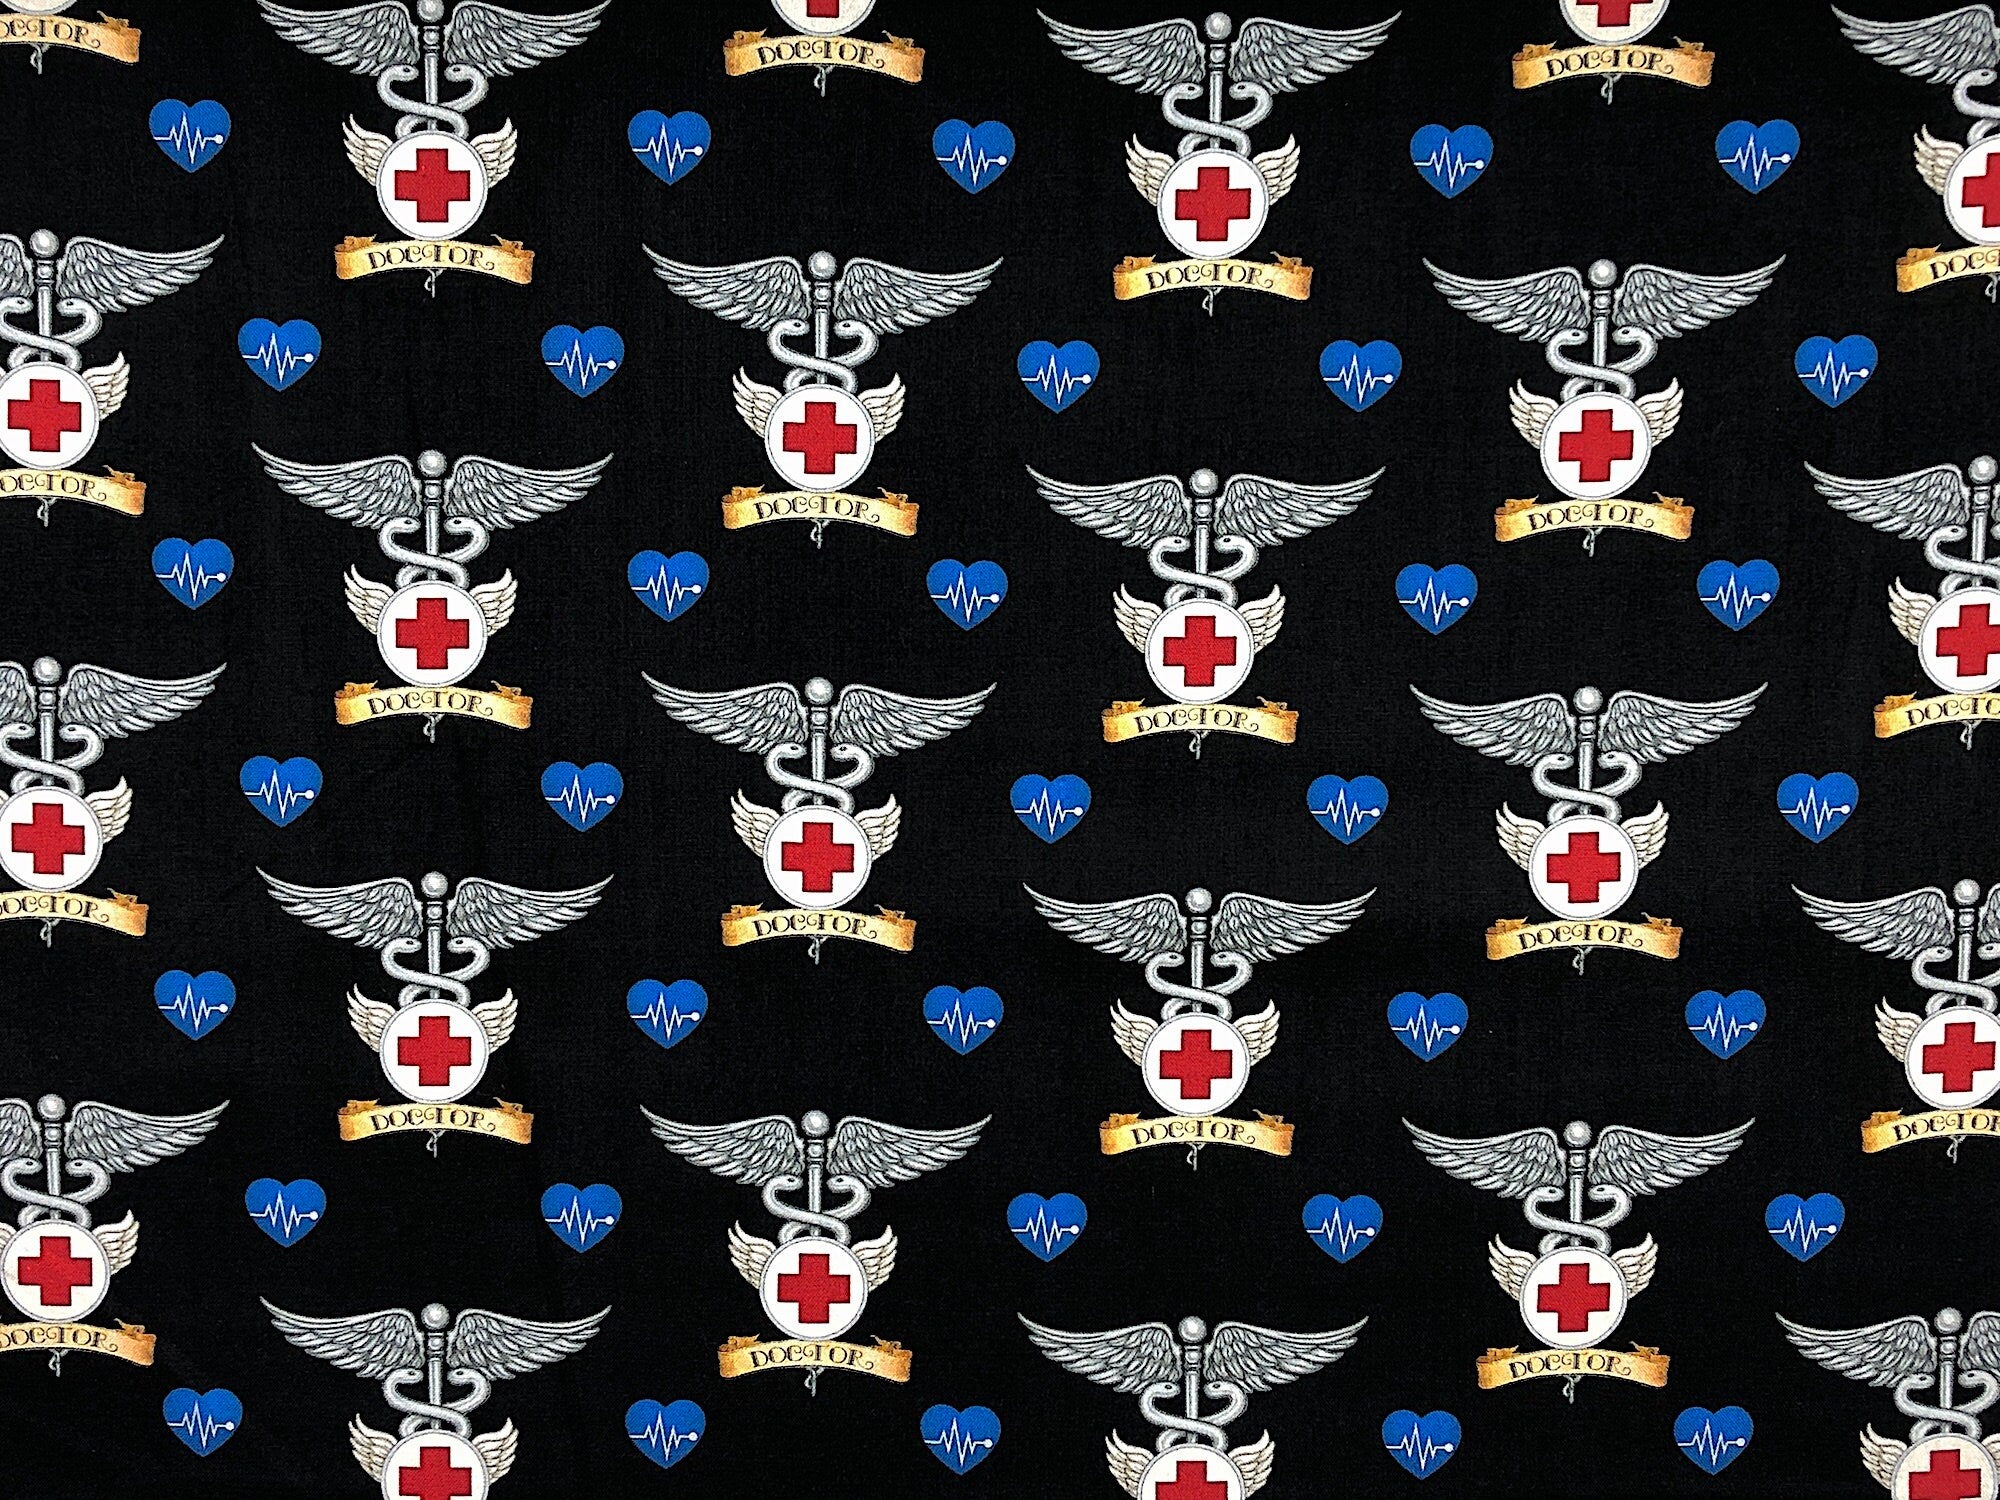 This black fabric is covered with doctor symbols. This fabric is part of the What the Doctor Ordered collection by QT Fabrics.